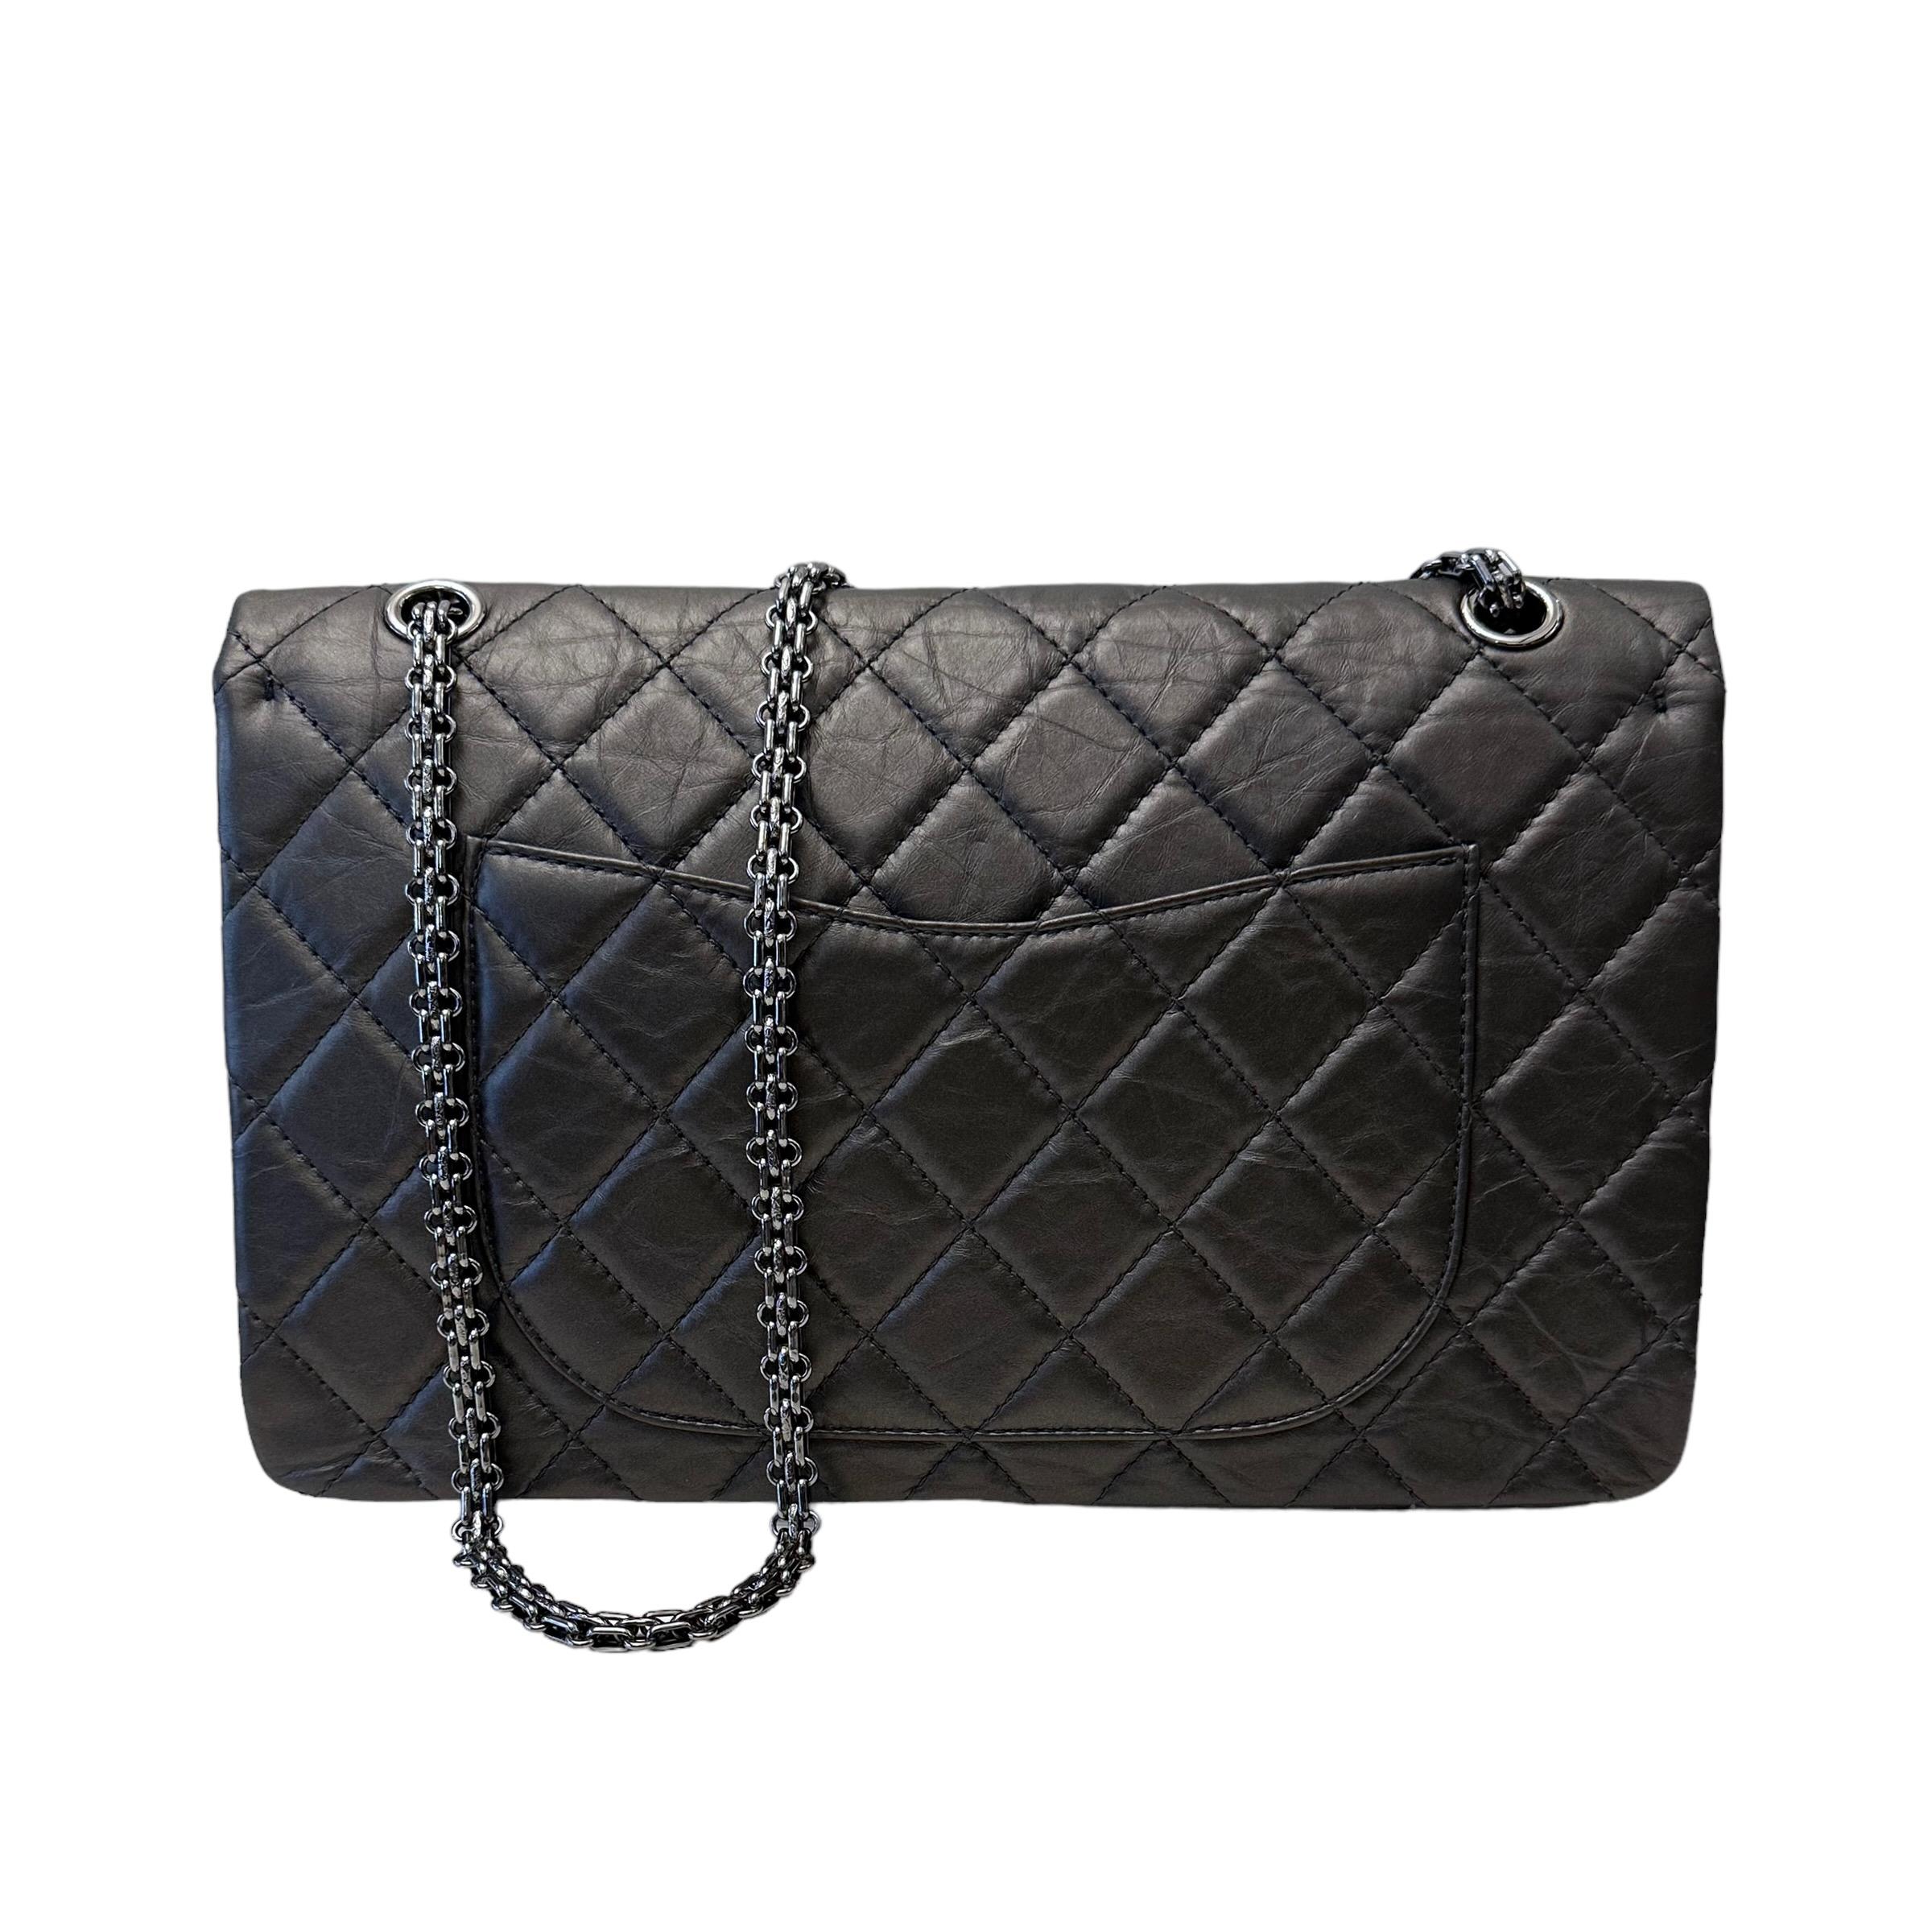 Chanel 2.55 Double Flap Grey Aged Calfskin Maxi Bag In Good Condition For Sale In Geneva, CH